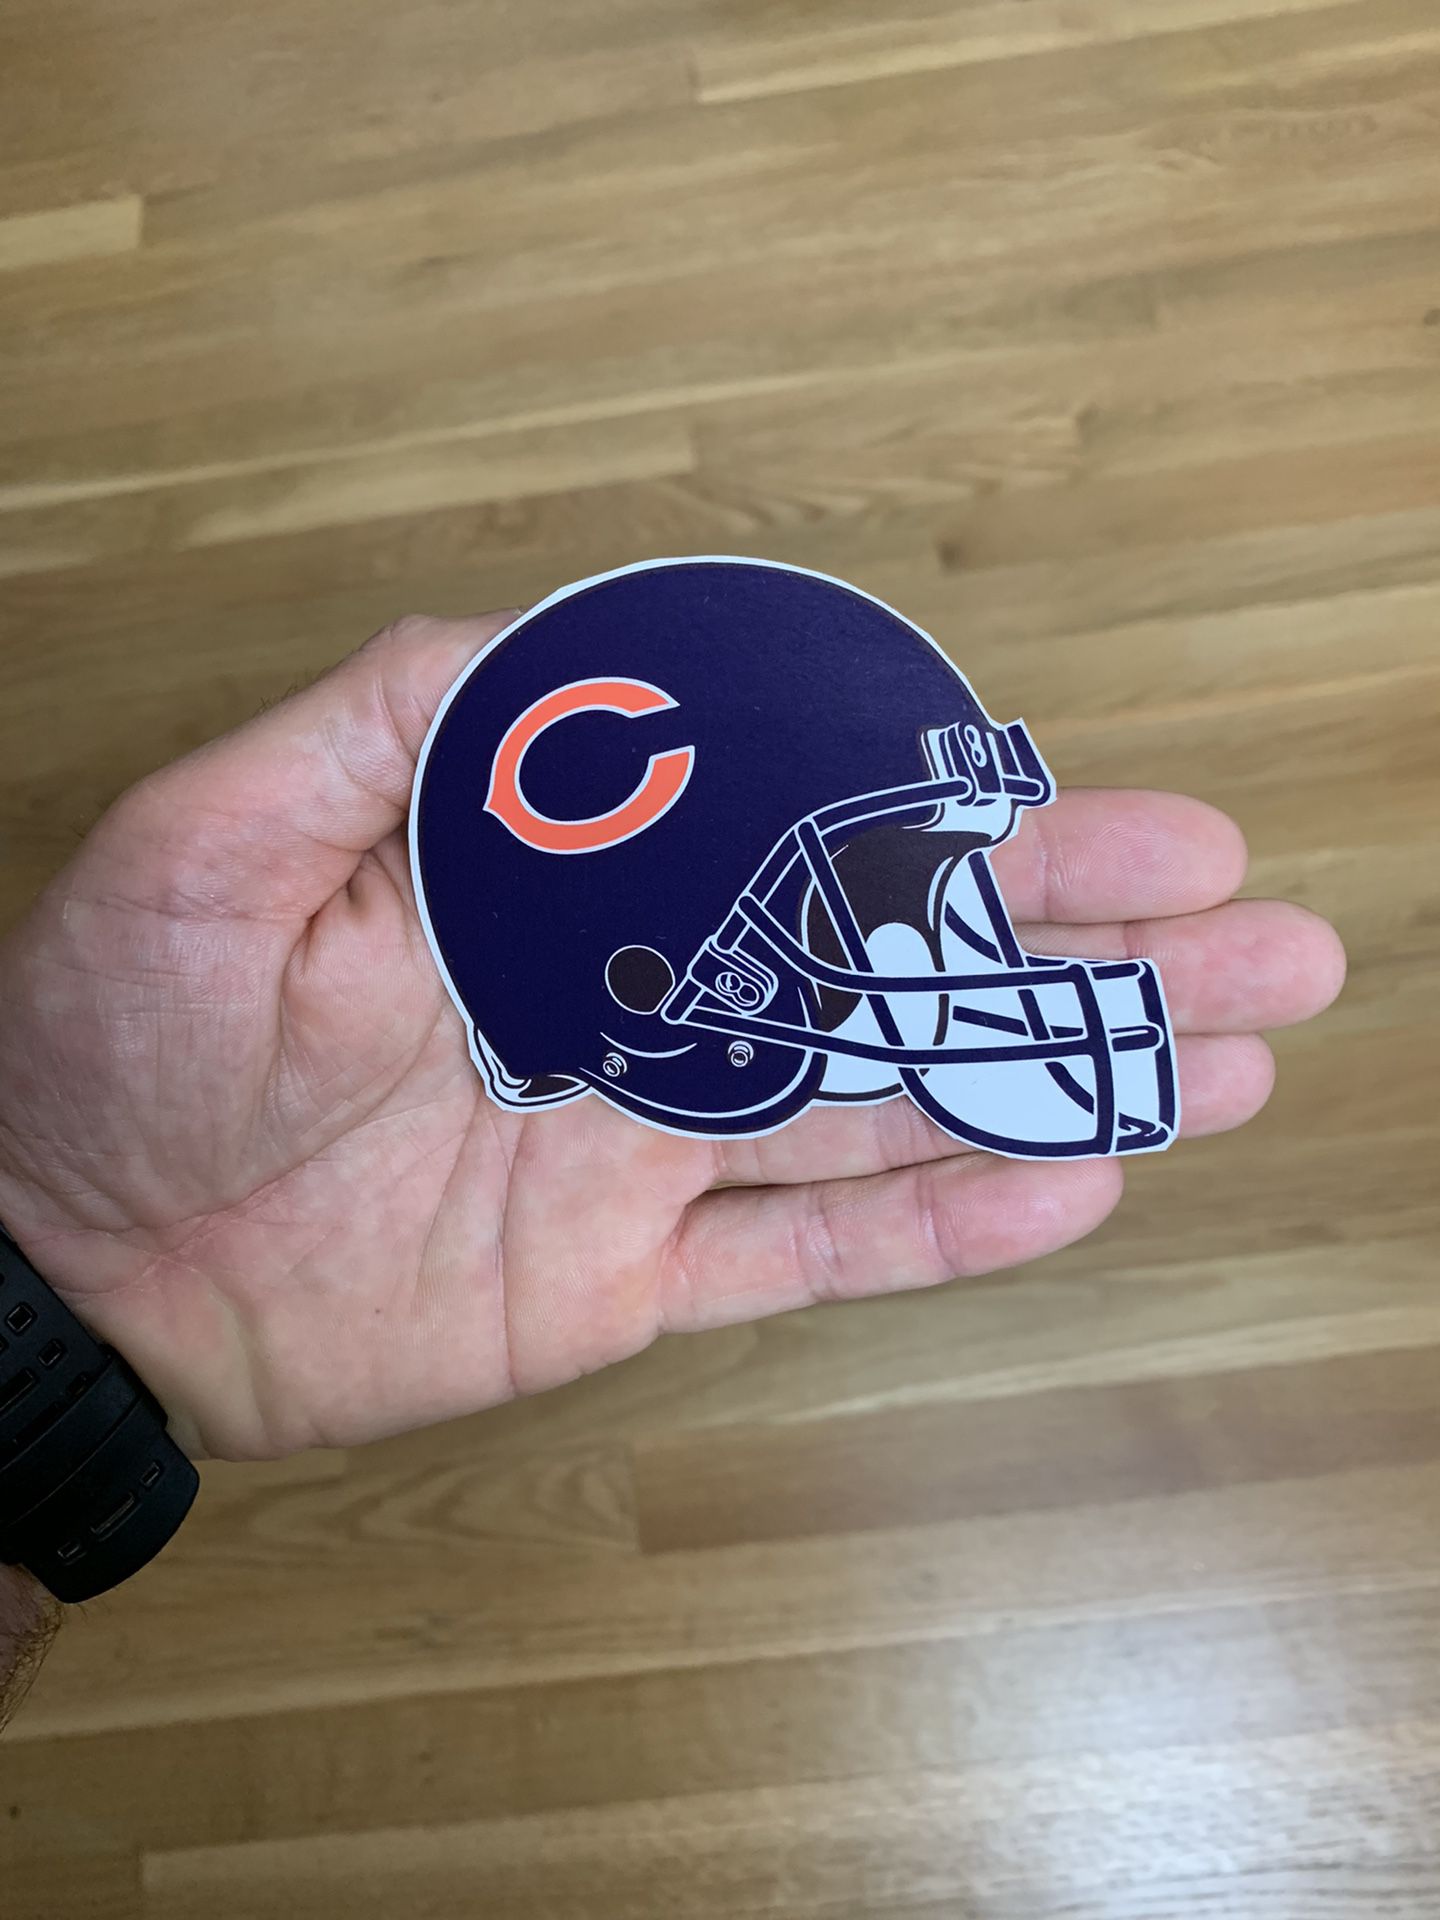 Chicago Bears NFL Helmet Sticker Football Decal for Sale in Los